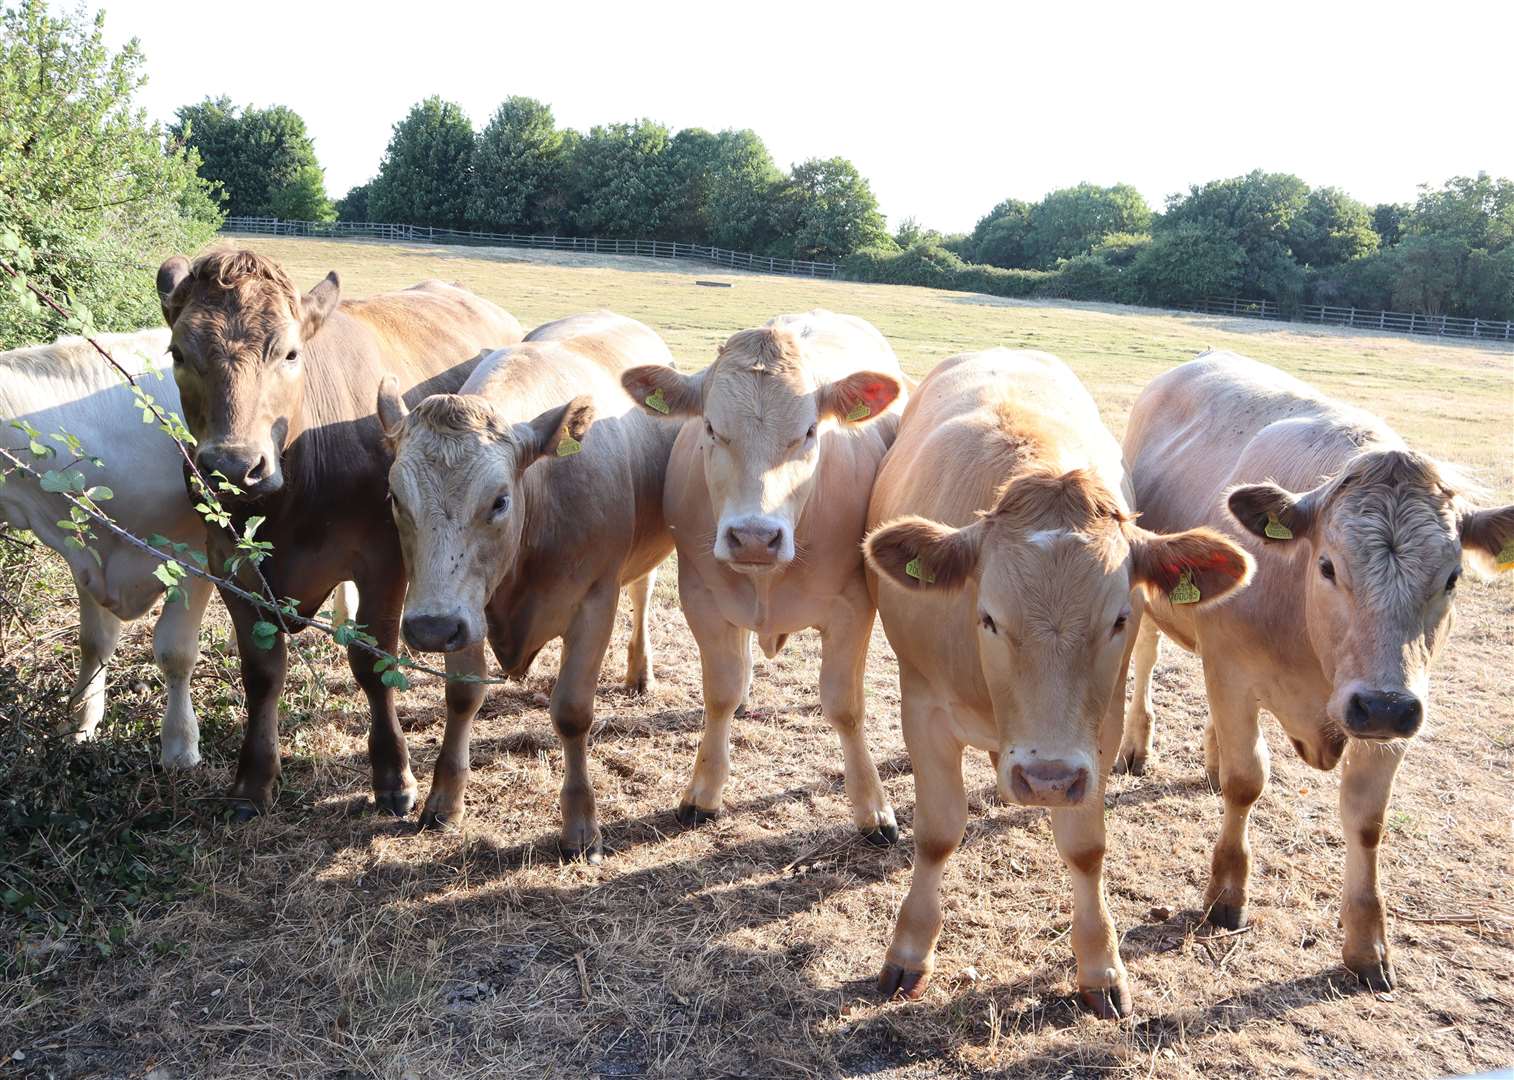 Farmers in the county who handle livestock are being urged to reduce the risks involved